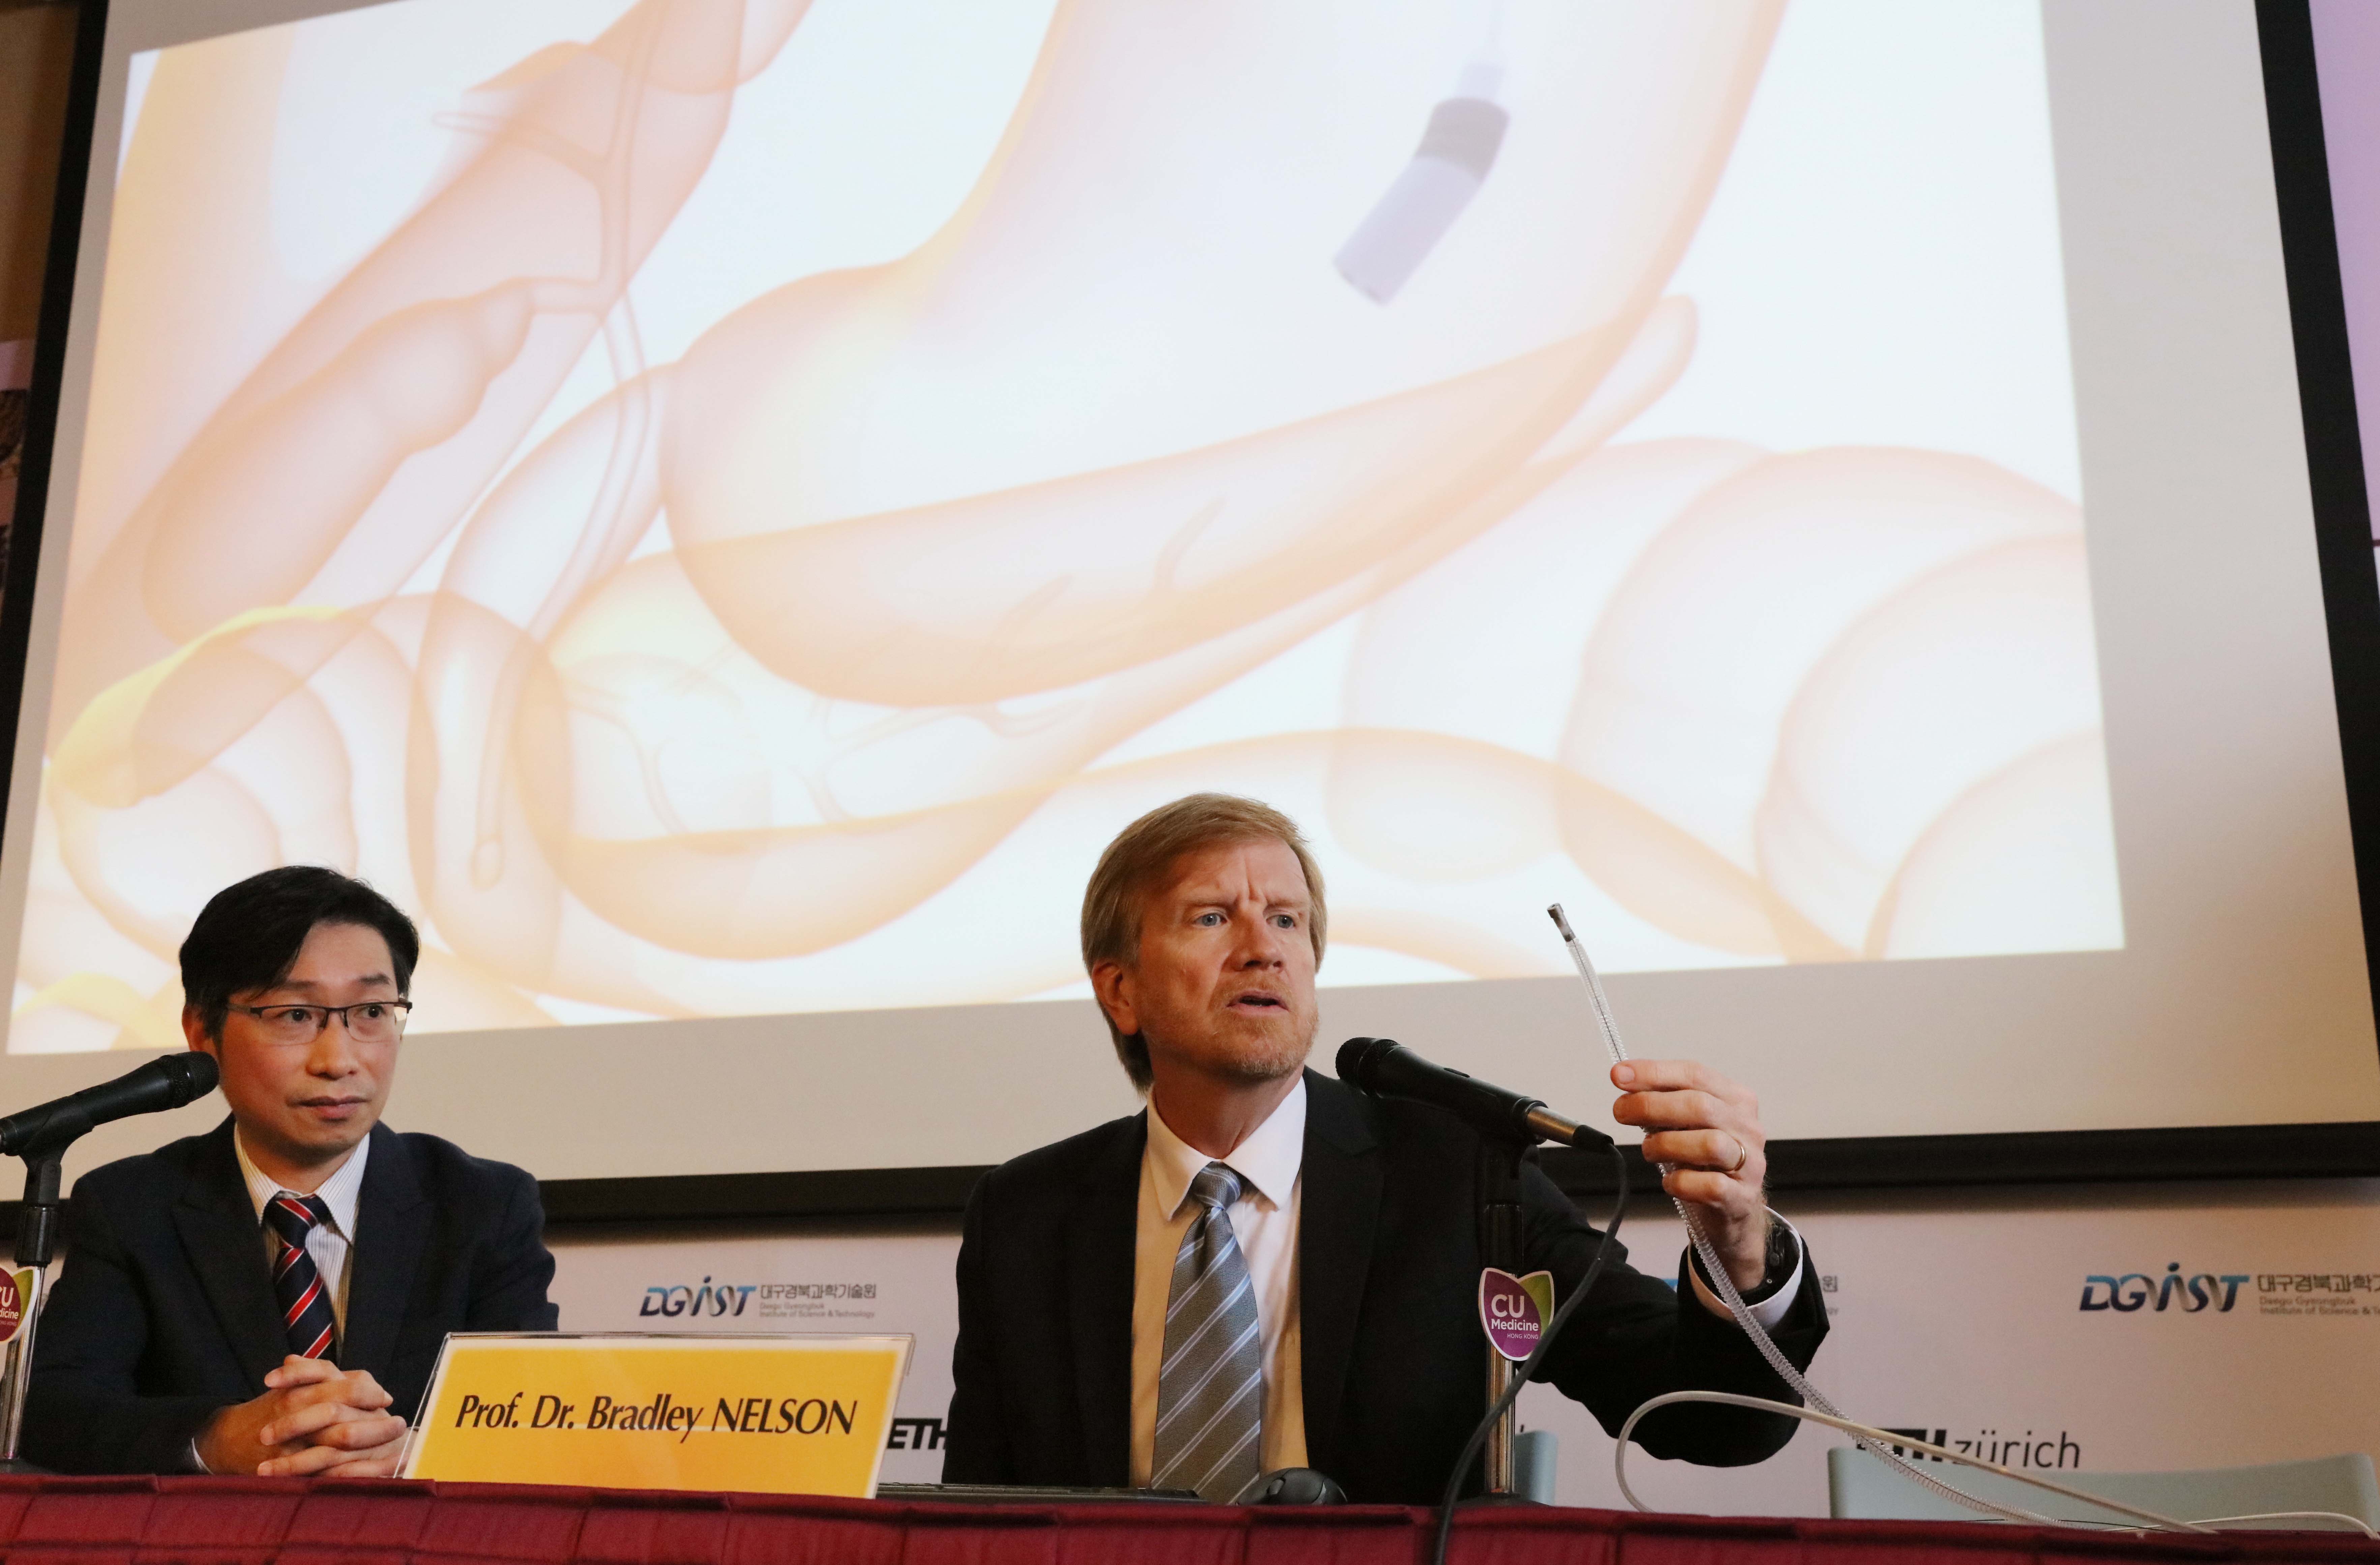  Prof. Dr. Bradley NELSON (right) displays animation of an innovative magnetic guided endoscope for small intestine check-up.